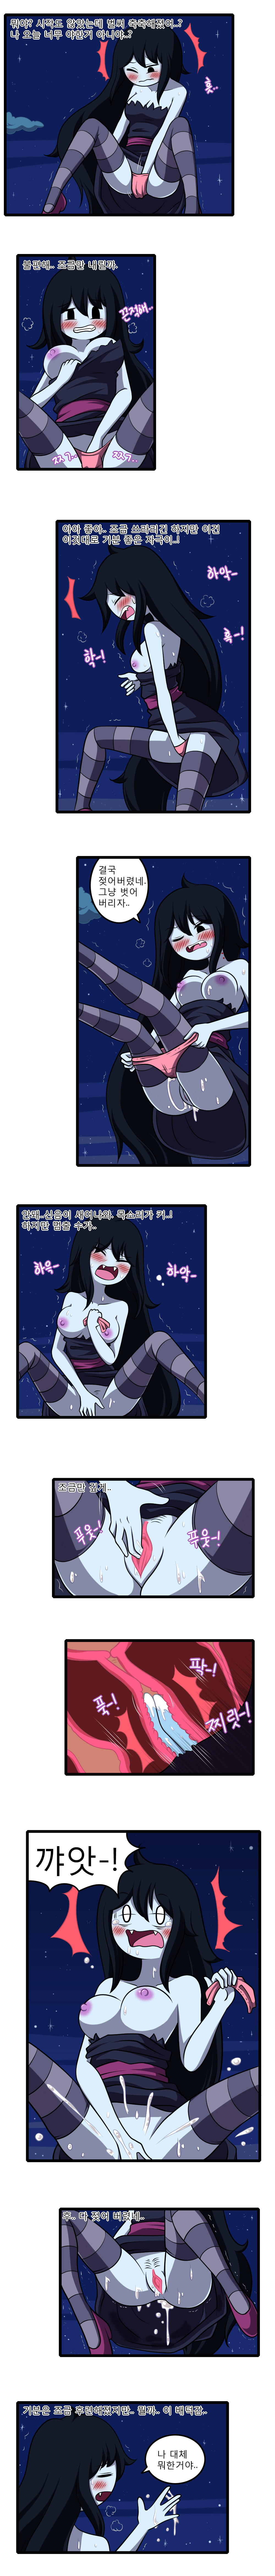 [WB] Adult Time 4 (Adventure Time) [Korean] 